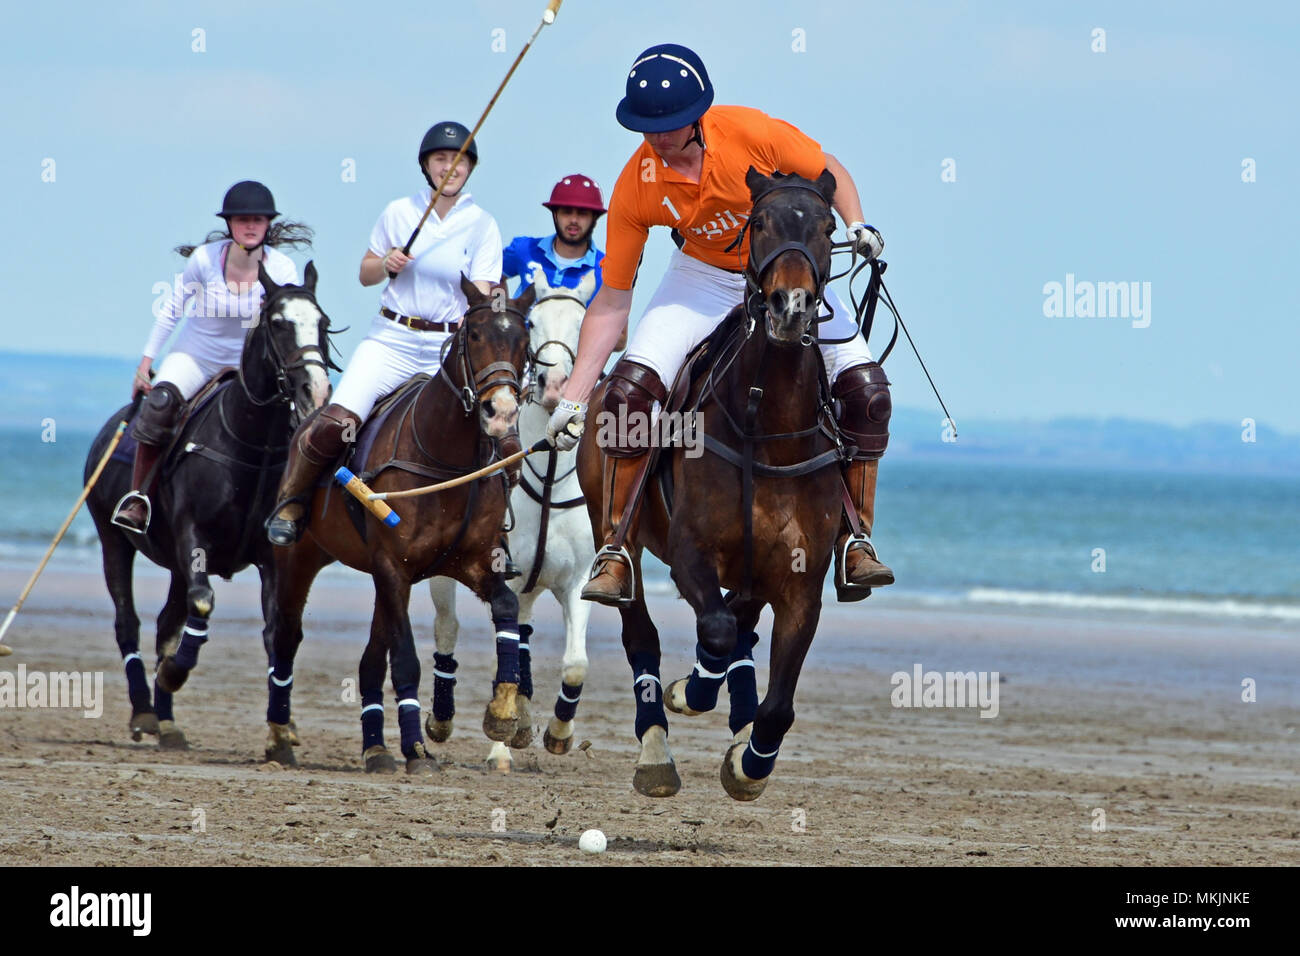 St Andrews, Scotland, United Kingdom, 08, May, 2018. St Andrews and Stirling University polo clubs play a friendly match on the beach at St Andrews, © Ken Jack / Alamy Live News Stock Photo